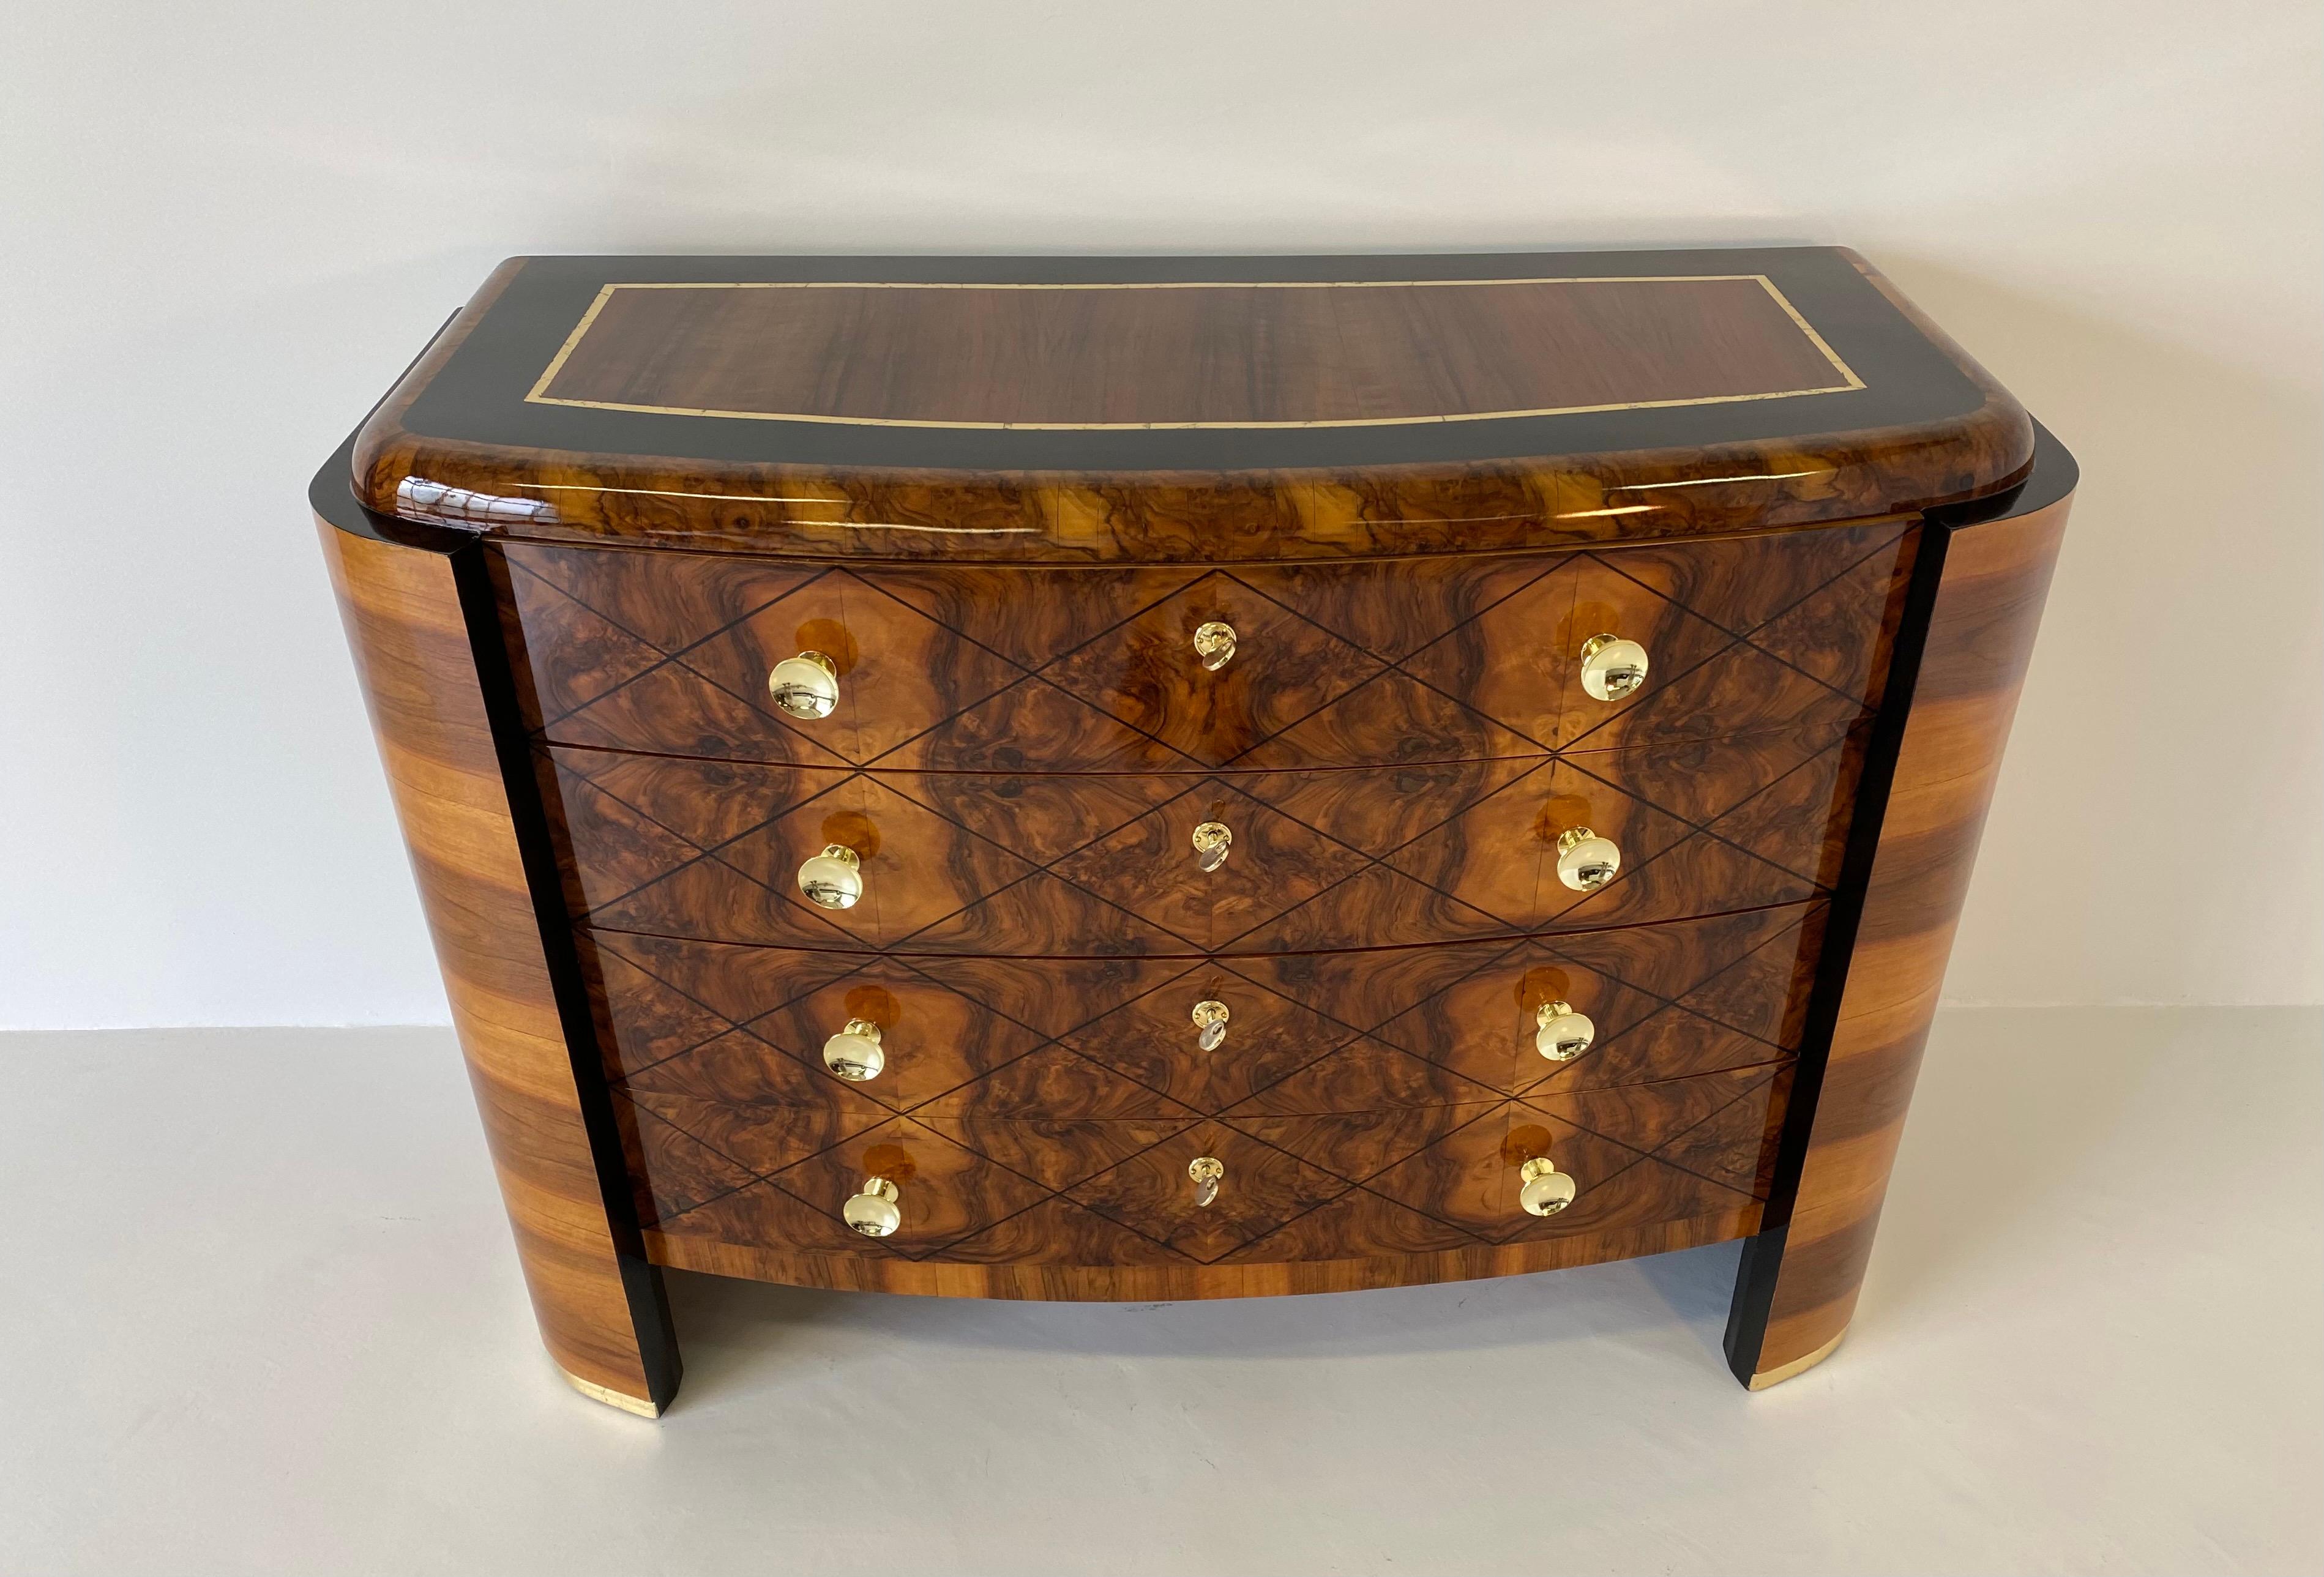 This chest of drawers was produced in Italy in the 1930s, it is completely covered in walnut briar with black lacquer details.
The front of the drawers is decorated with a Classic geometric pattern from the Art Deco period.
The solid wood feet are